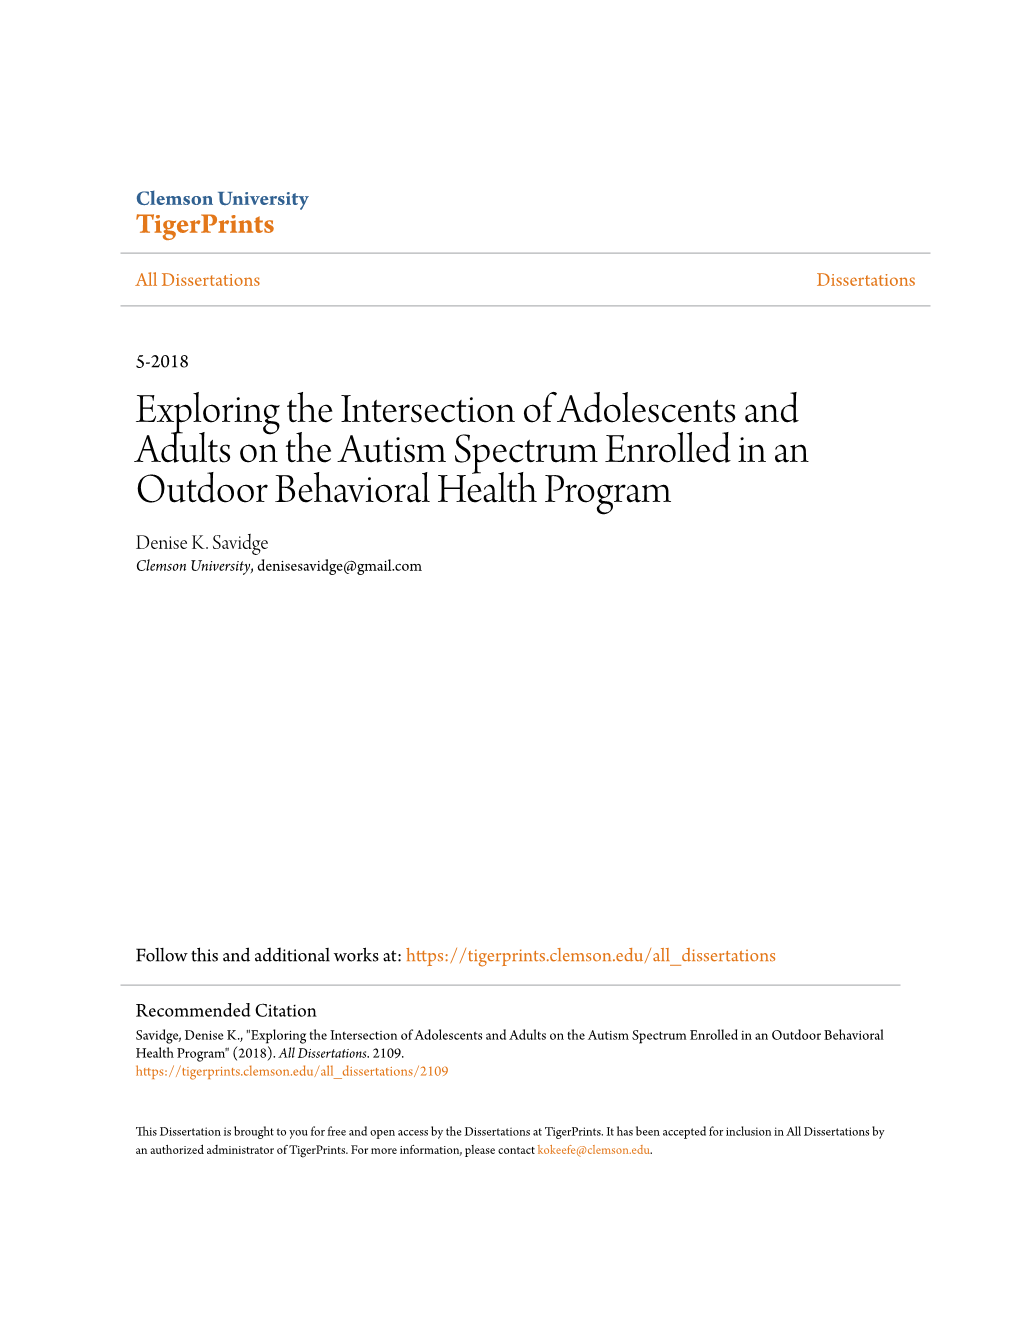 Exploring the Intersection of Adolescents and Adults on the Autism Spectrum Enrolled in an Outdoor Behavioral Health Program Denise K